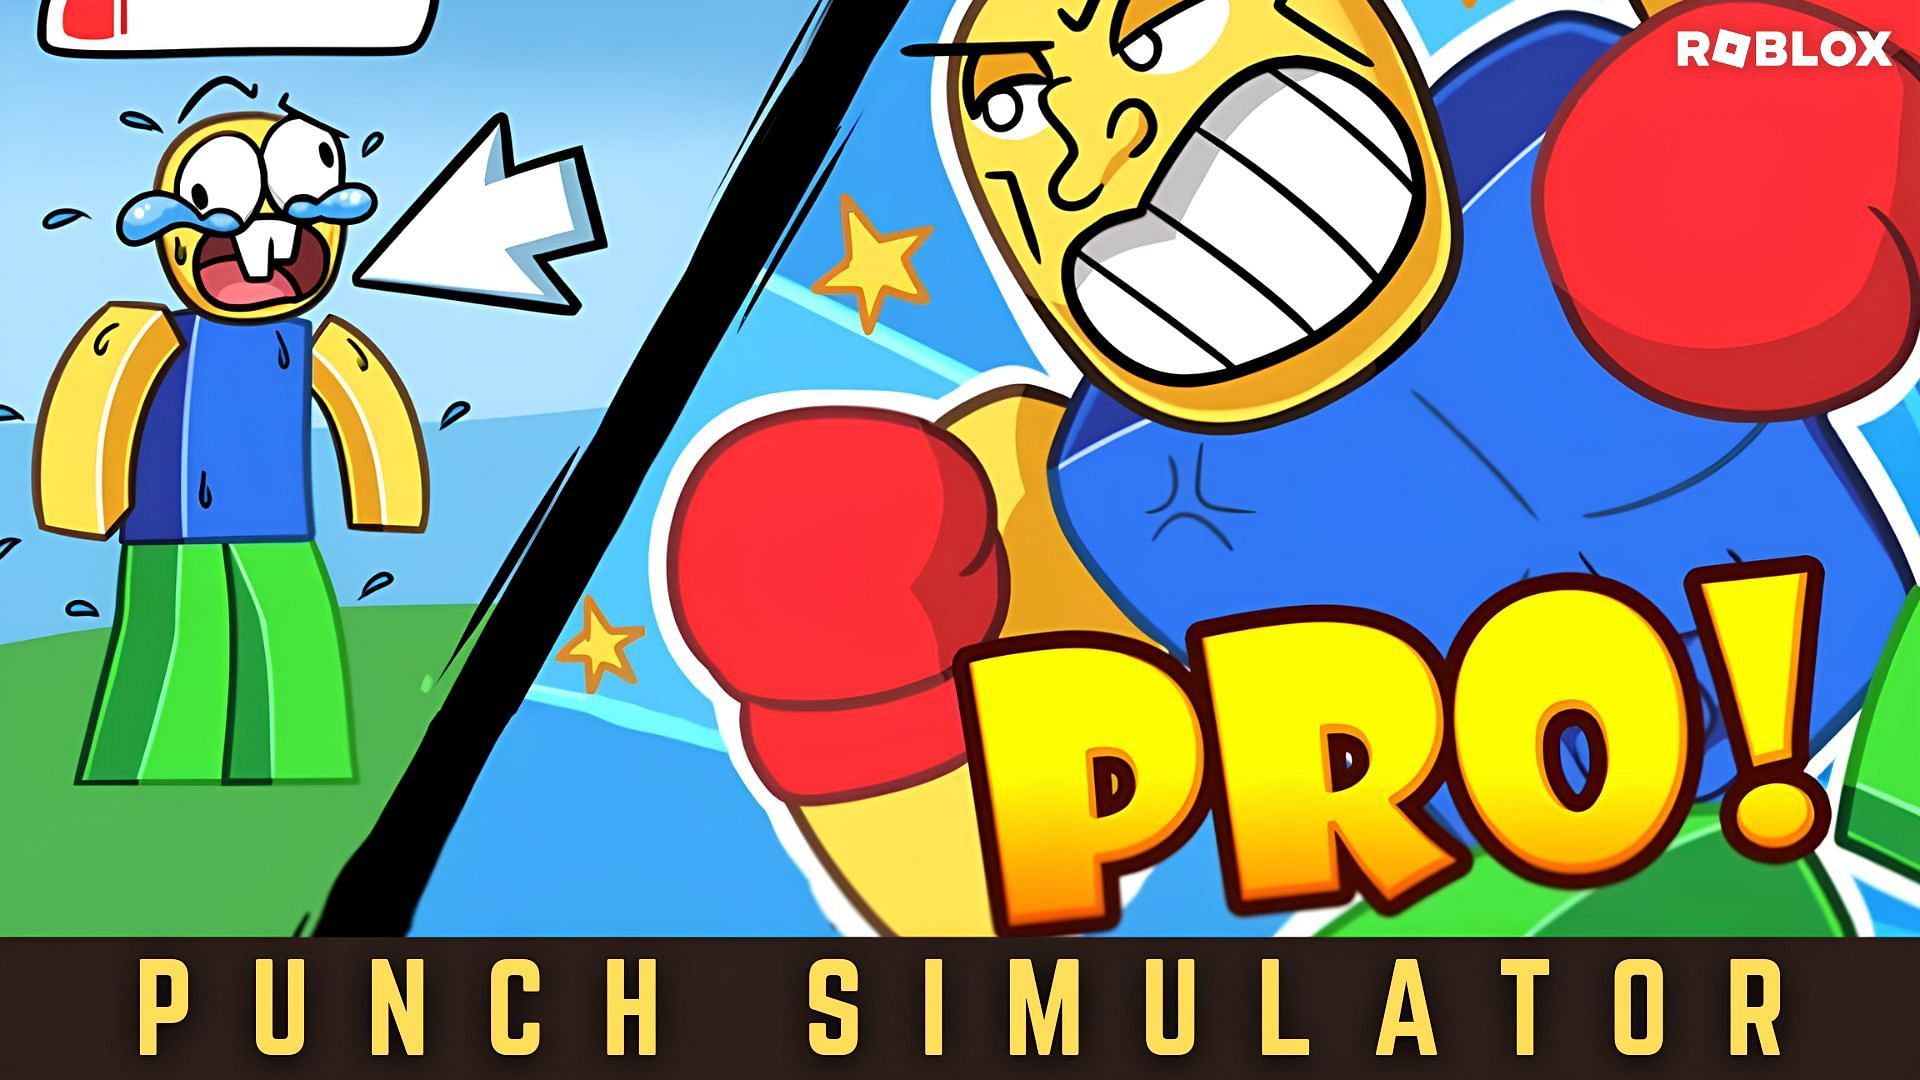 Level up, one punch at a time in Punch Simulator. (Image via Sportskeeda)